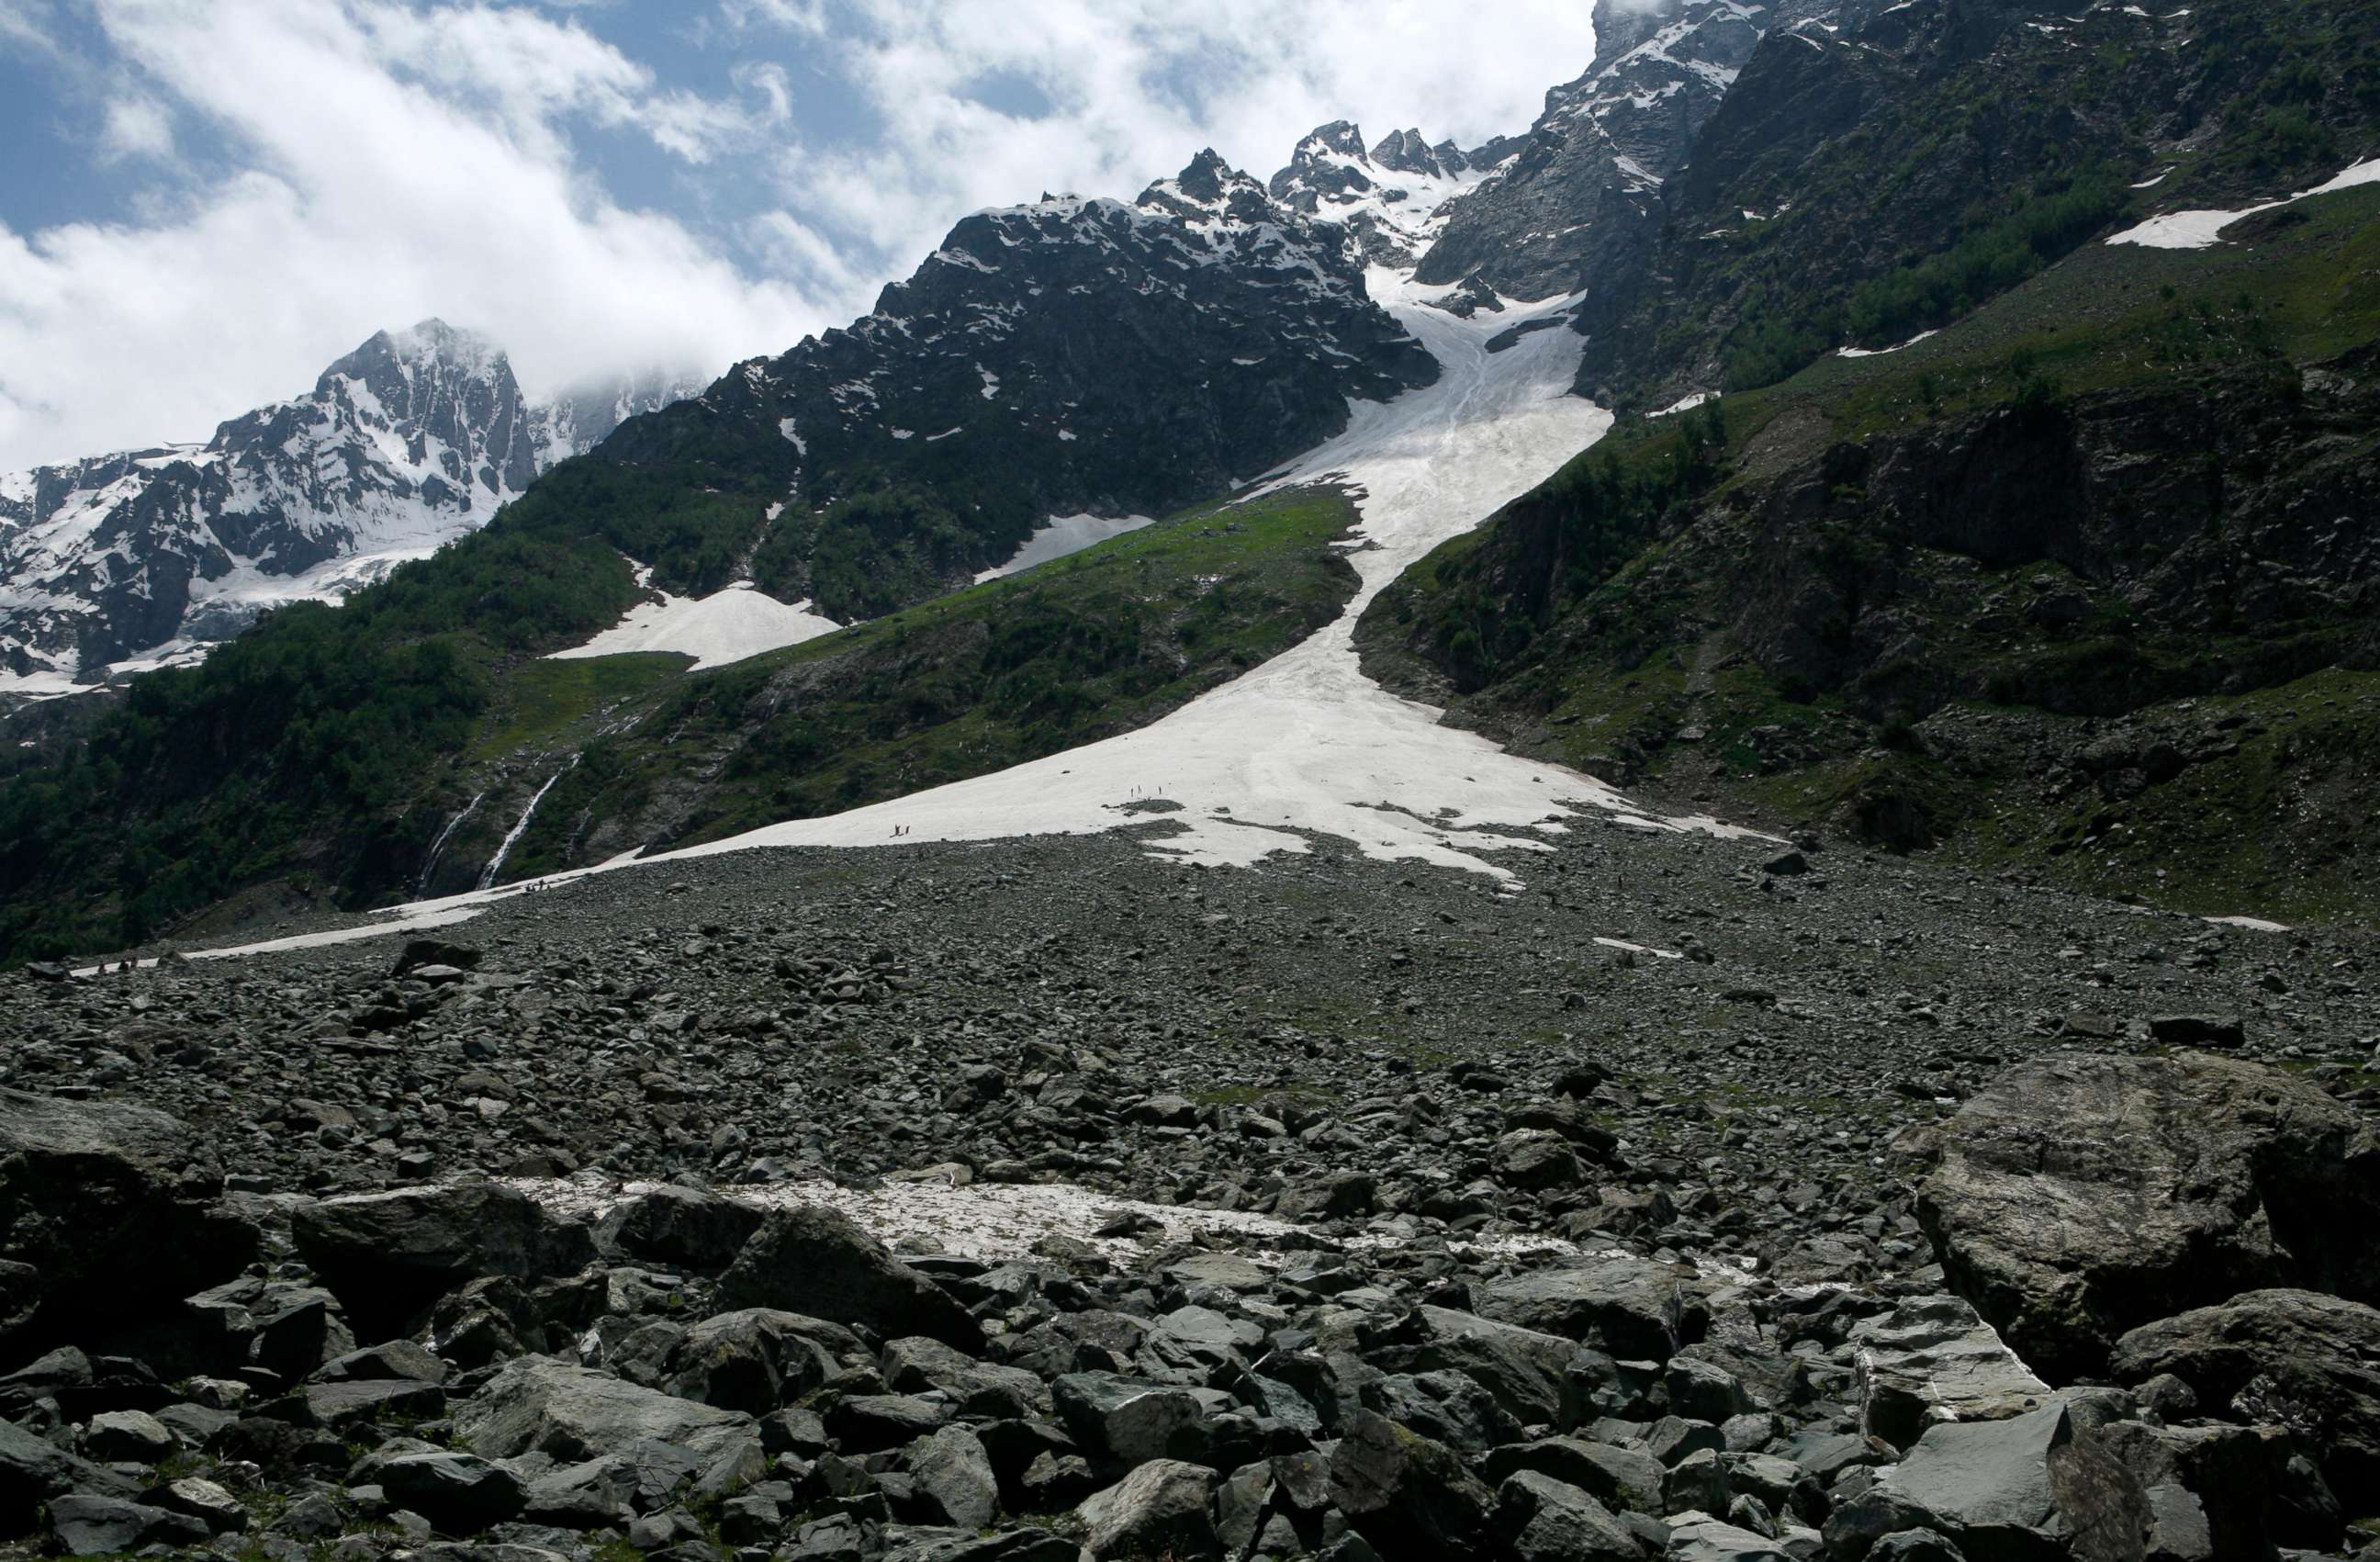 PHOTO: In this June 25, 2010, file photo, a receding glacier on in Sonamarg, Kashmir, India, is shown.